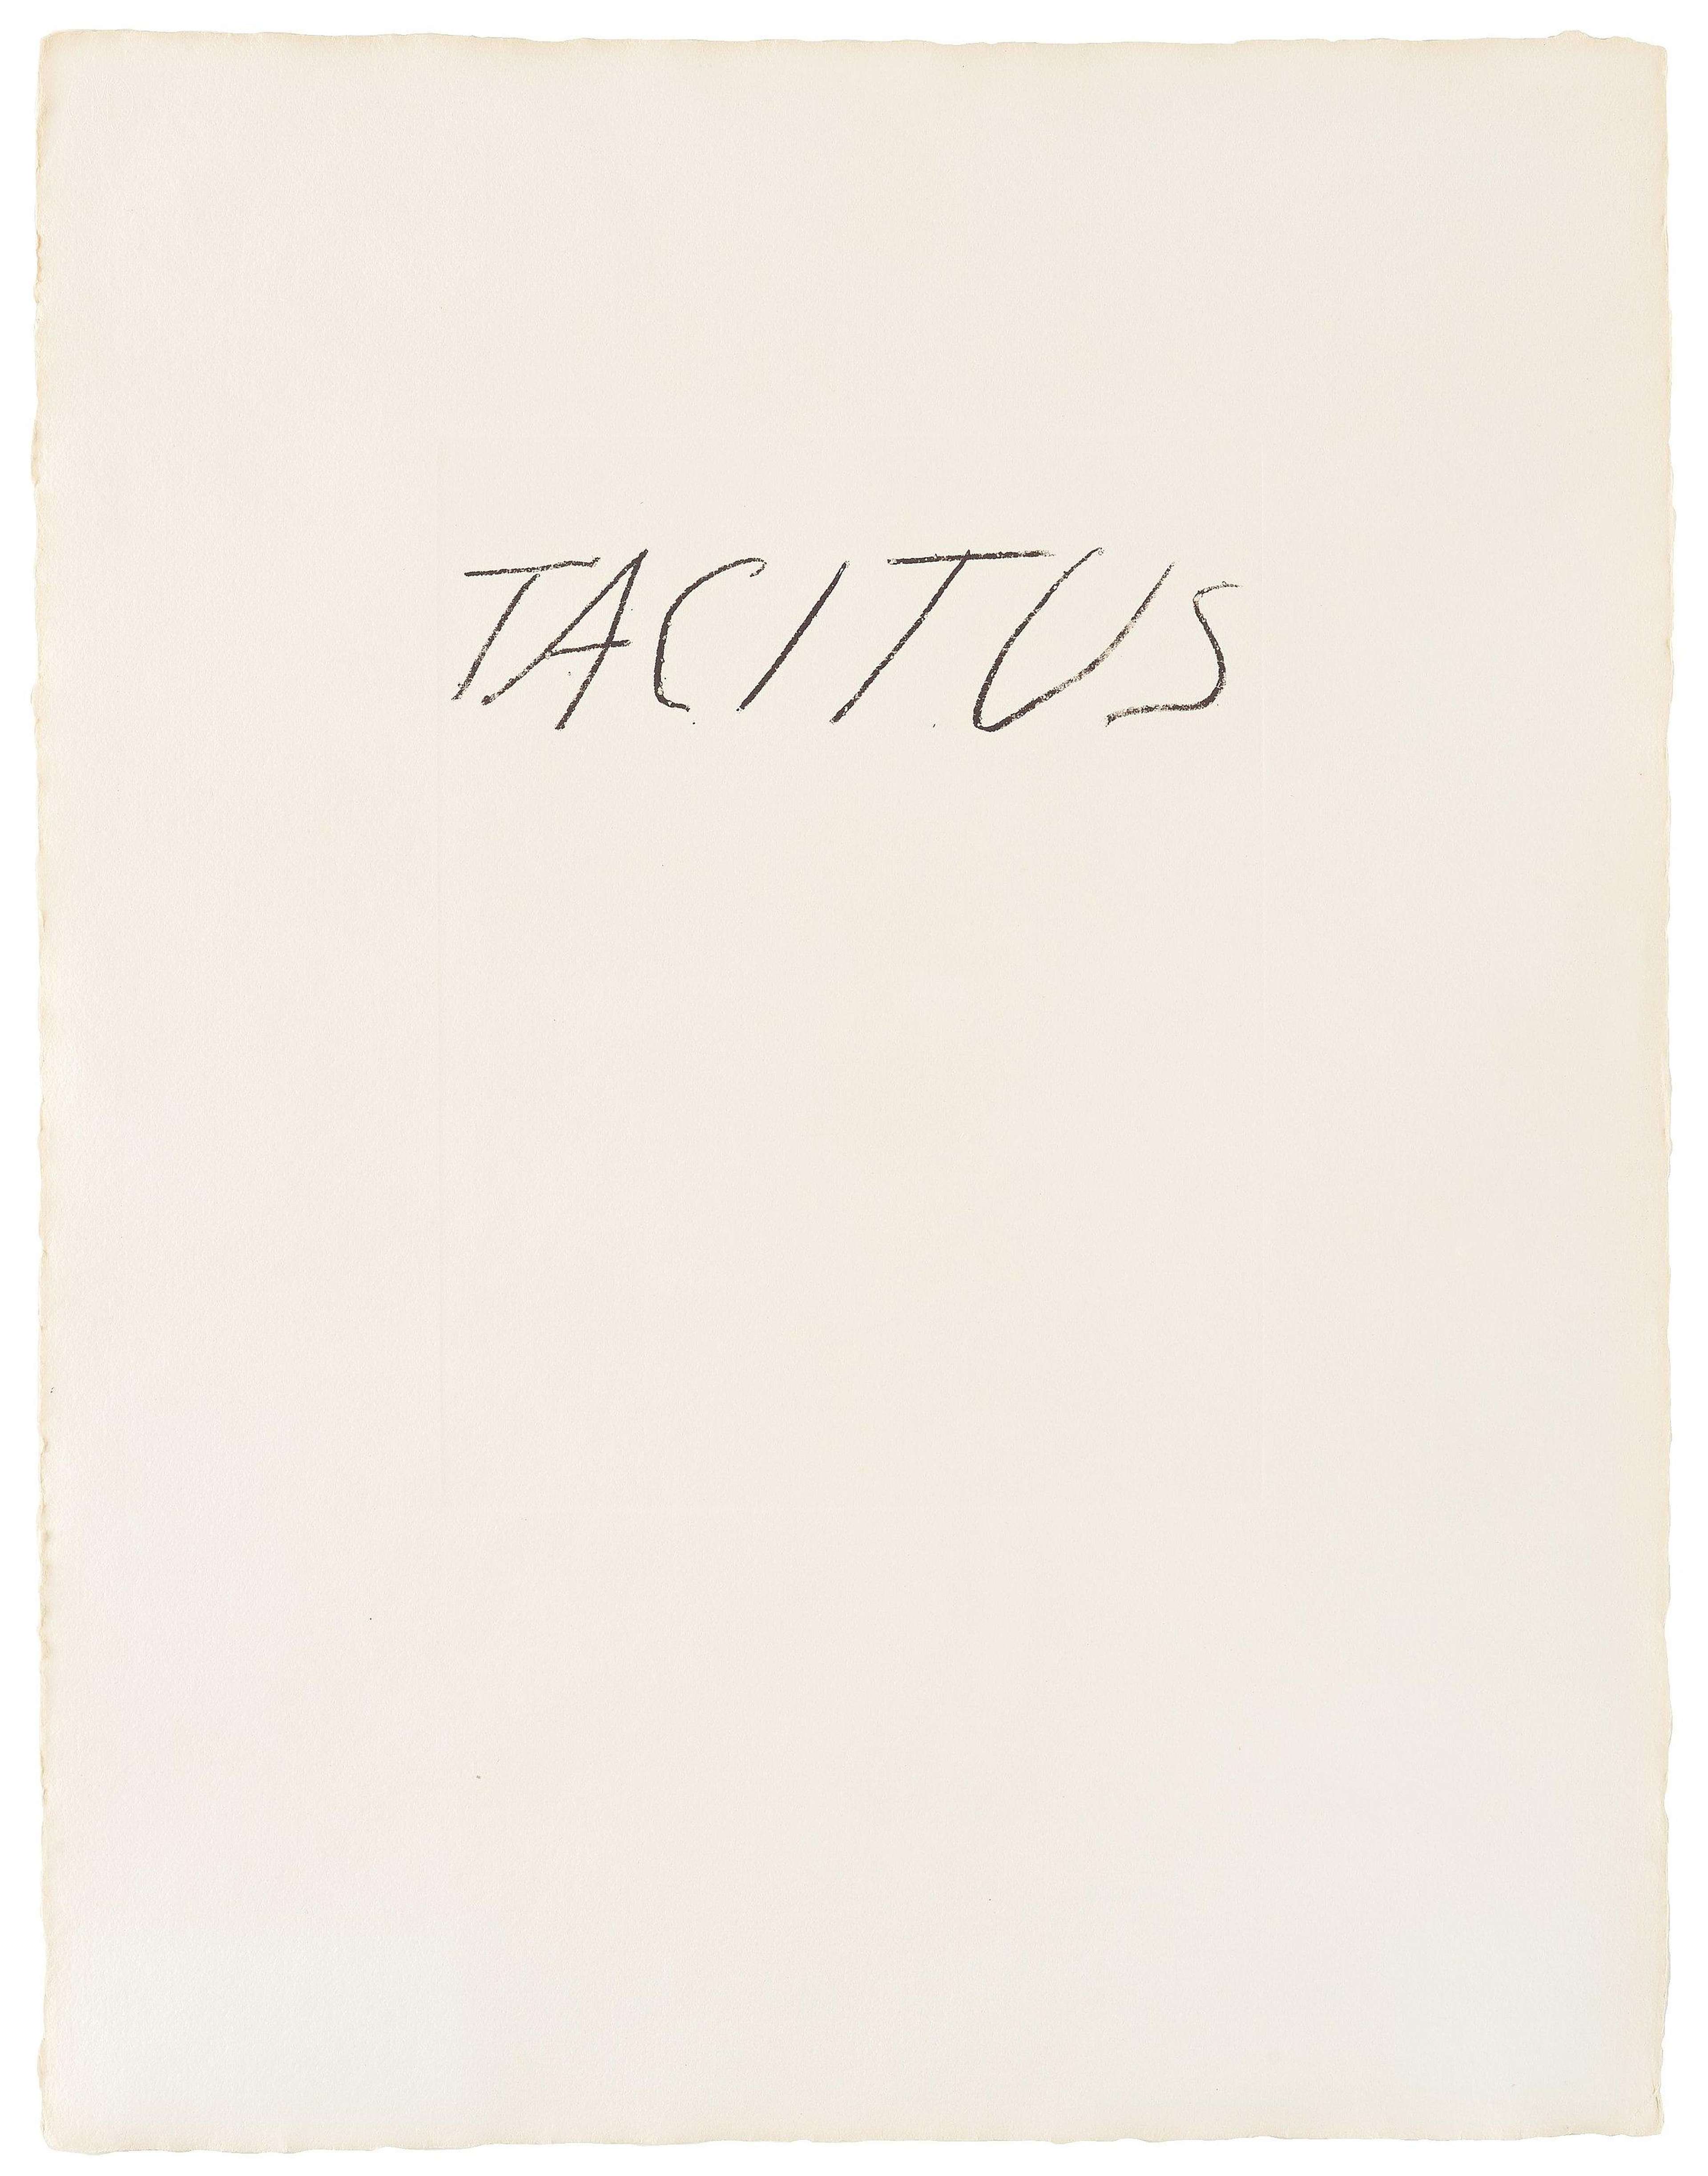 Tacitus - Signed Print by Cy Twombly 1975 - MyArtBroker